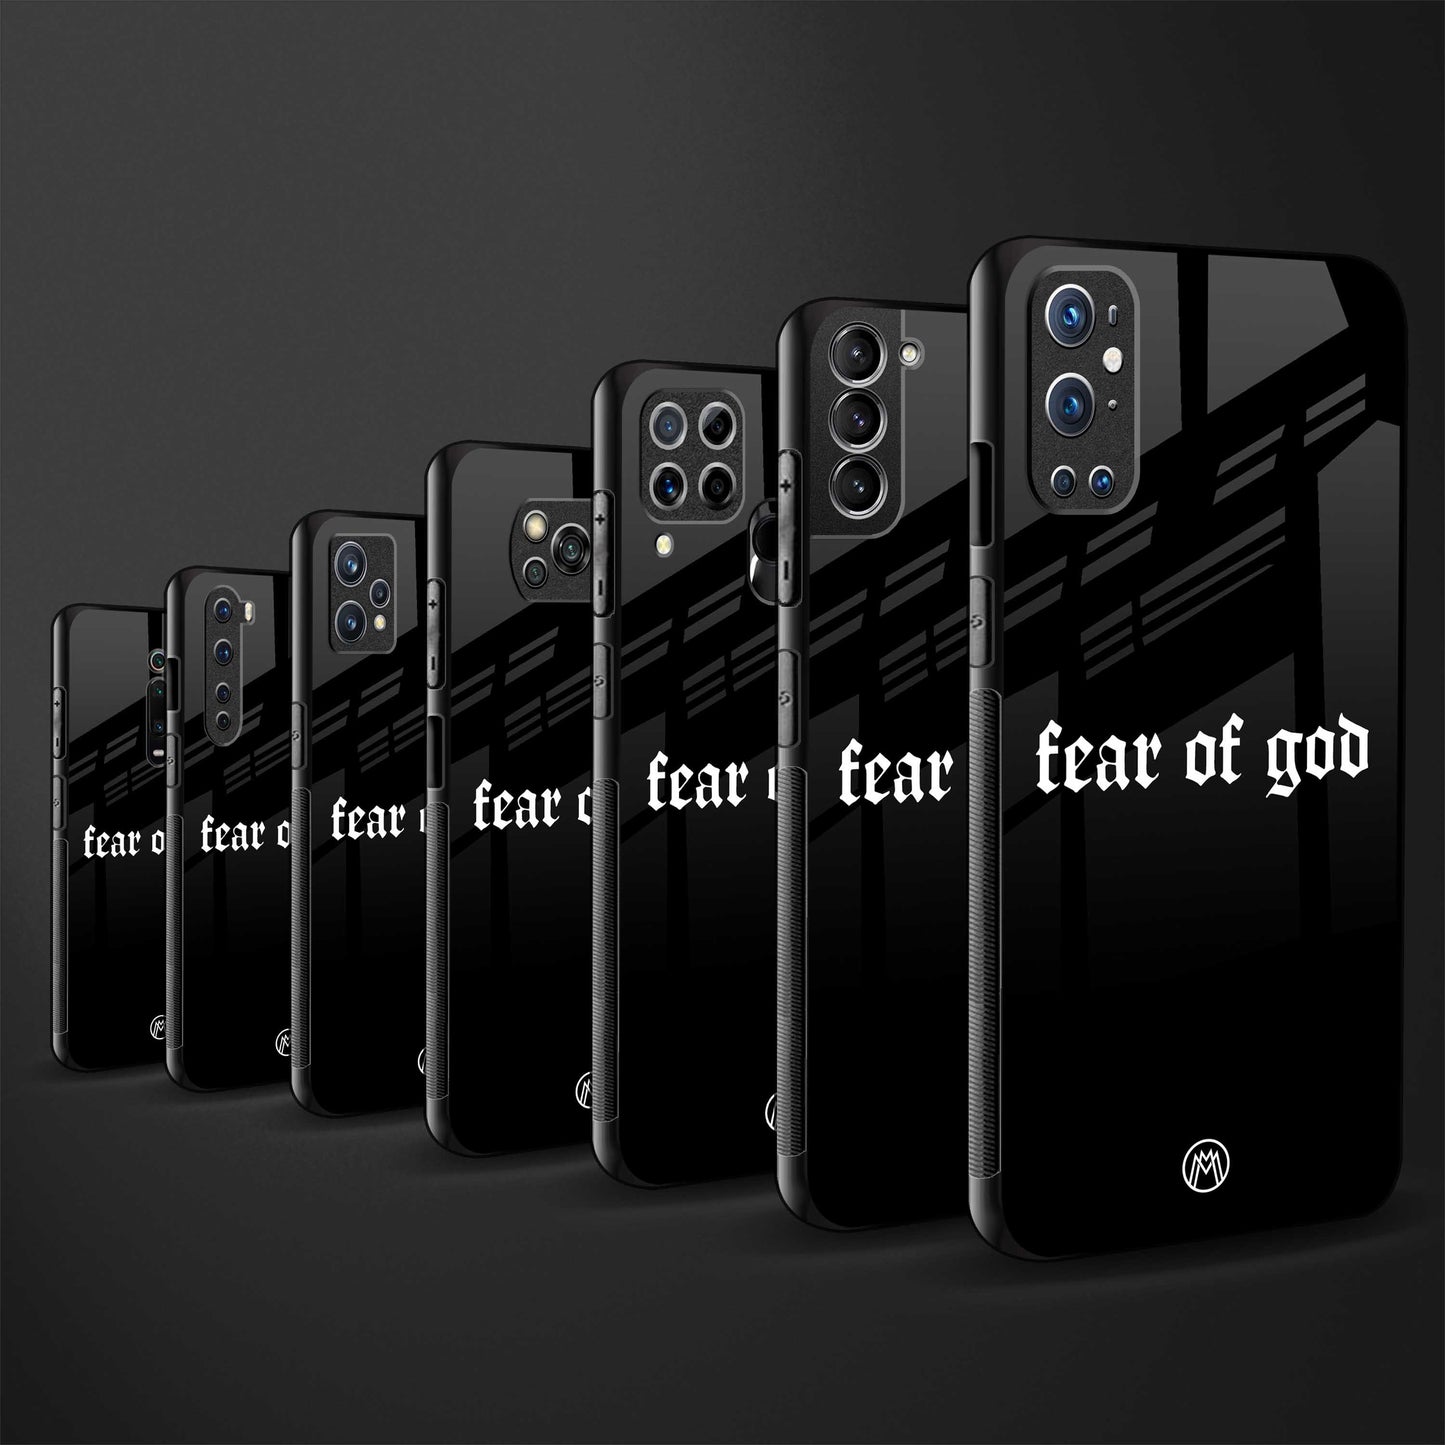 fear of god phone cover for realme c35